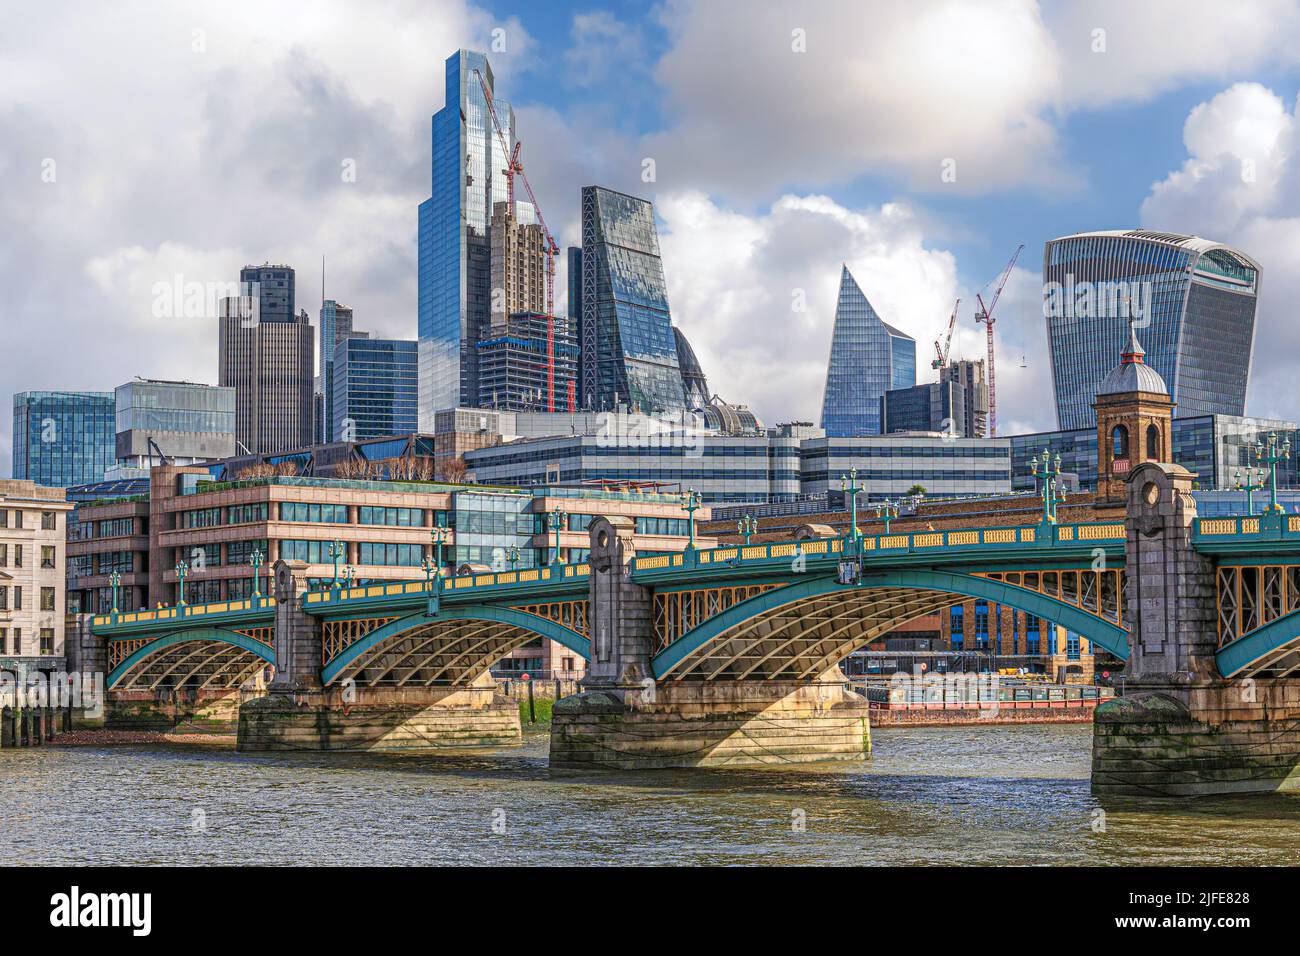 Colourful Southwark Bridge spanning the River Thames in London with Canary Wharf behind Stock Photo